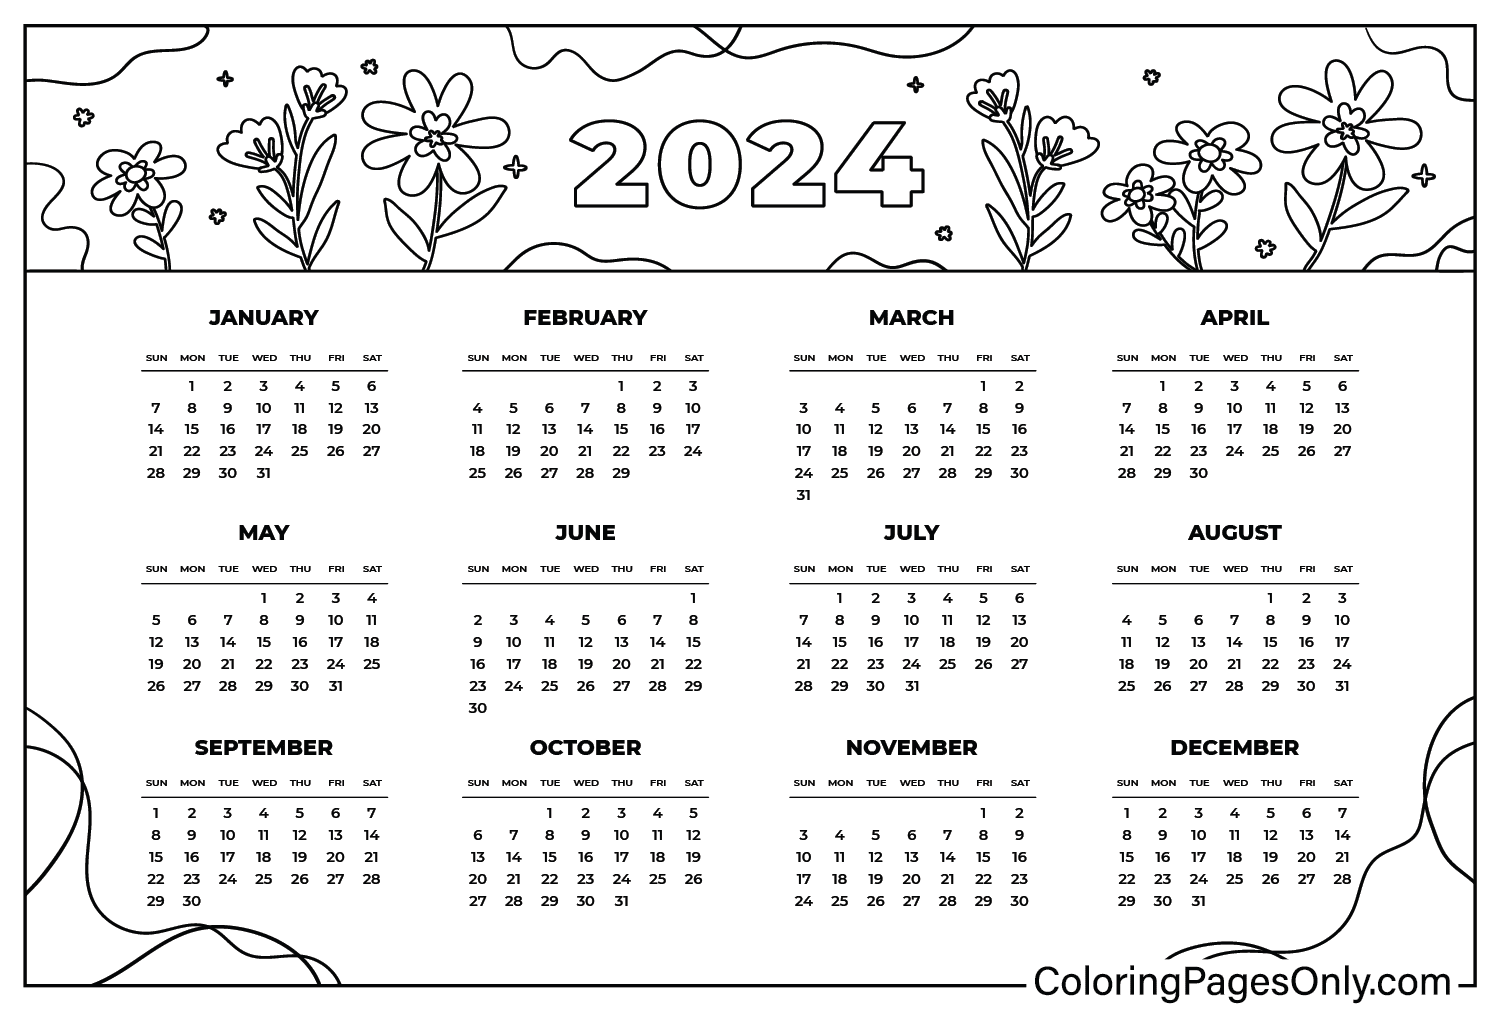 18 Free Printable Calendar 2024 Coloring Pages